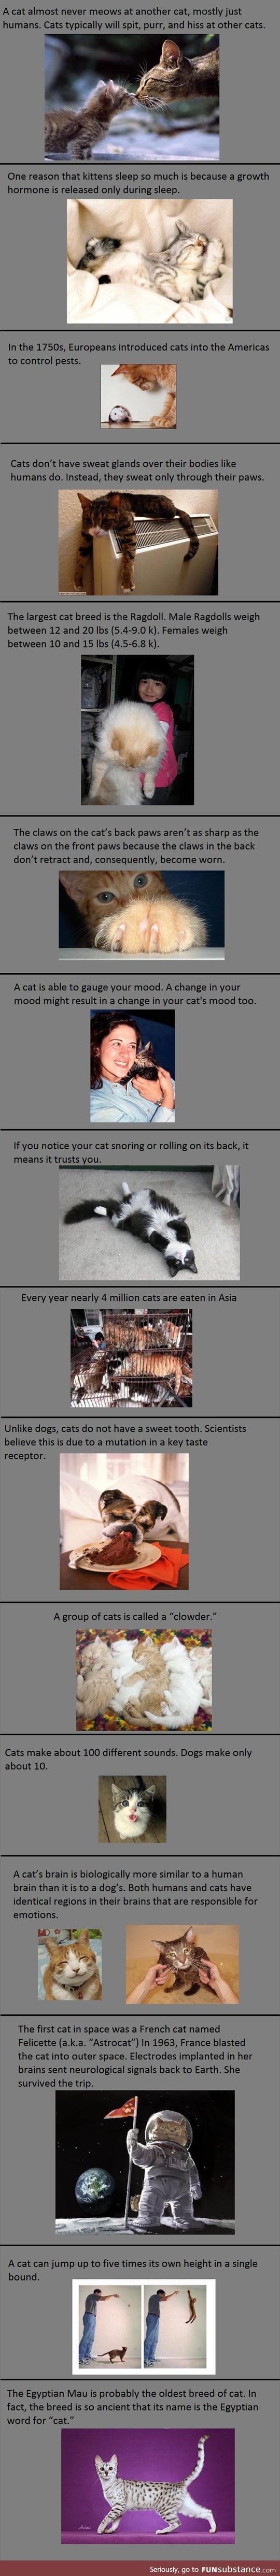 Interesting Cat Facts You Probably Don't Know